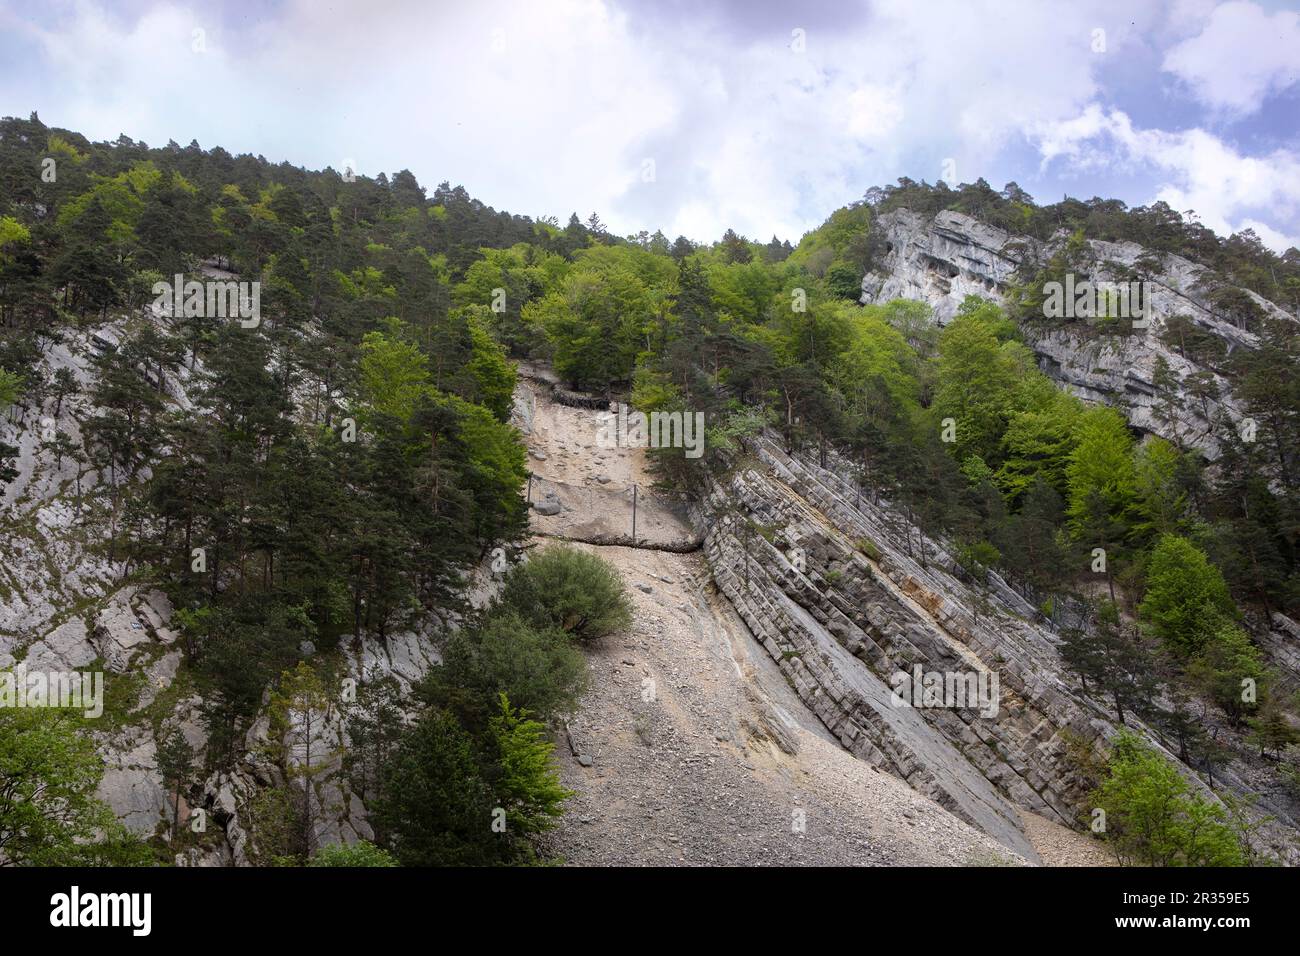 Jura mountains swiss landscape. Mountain steep slope with vibrant green trees and rockslide with wire protection against stones fall. Stock Photo